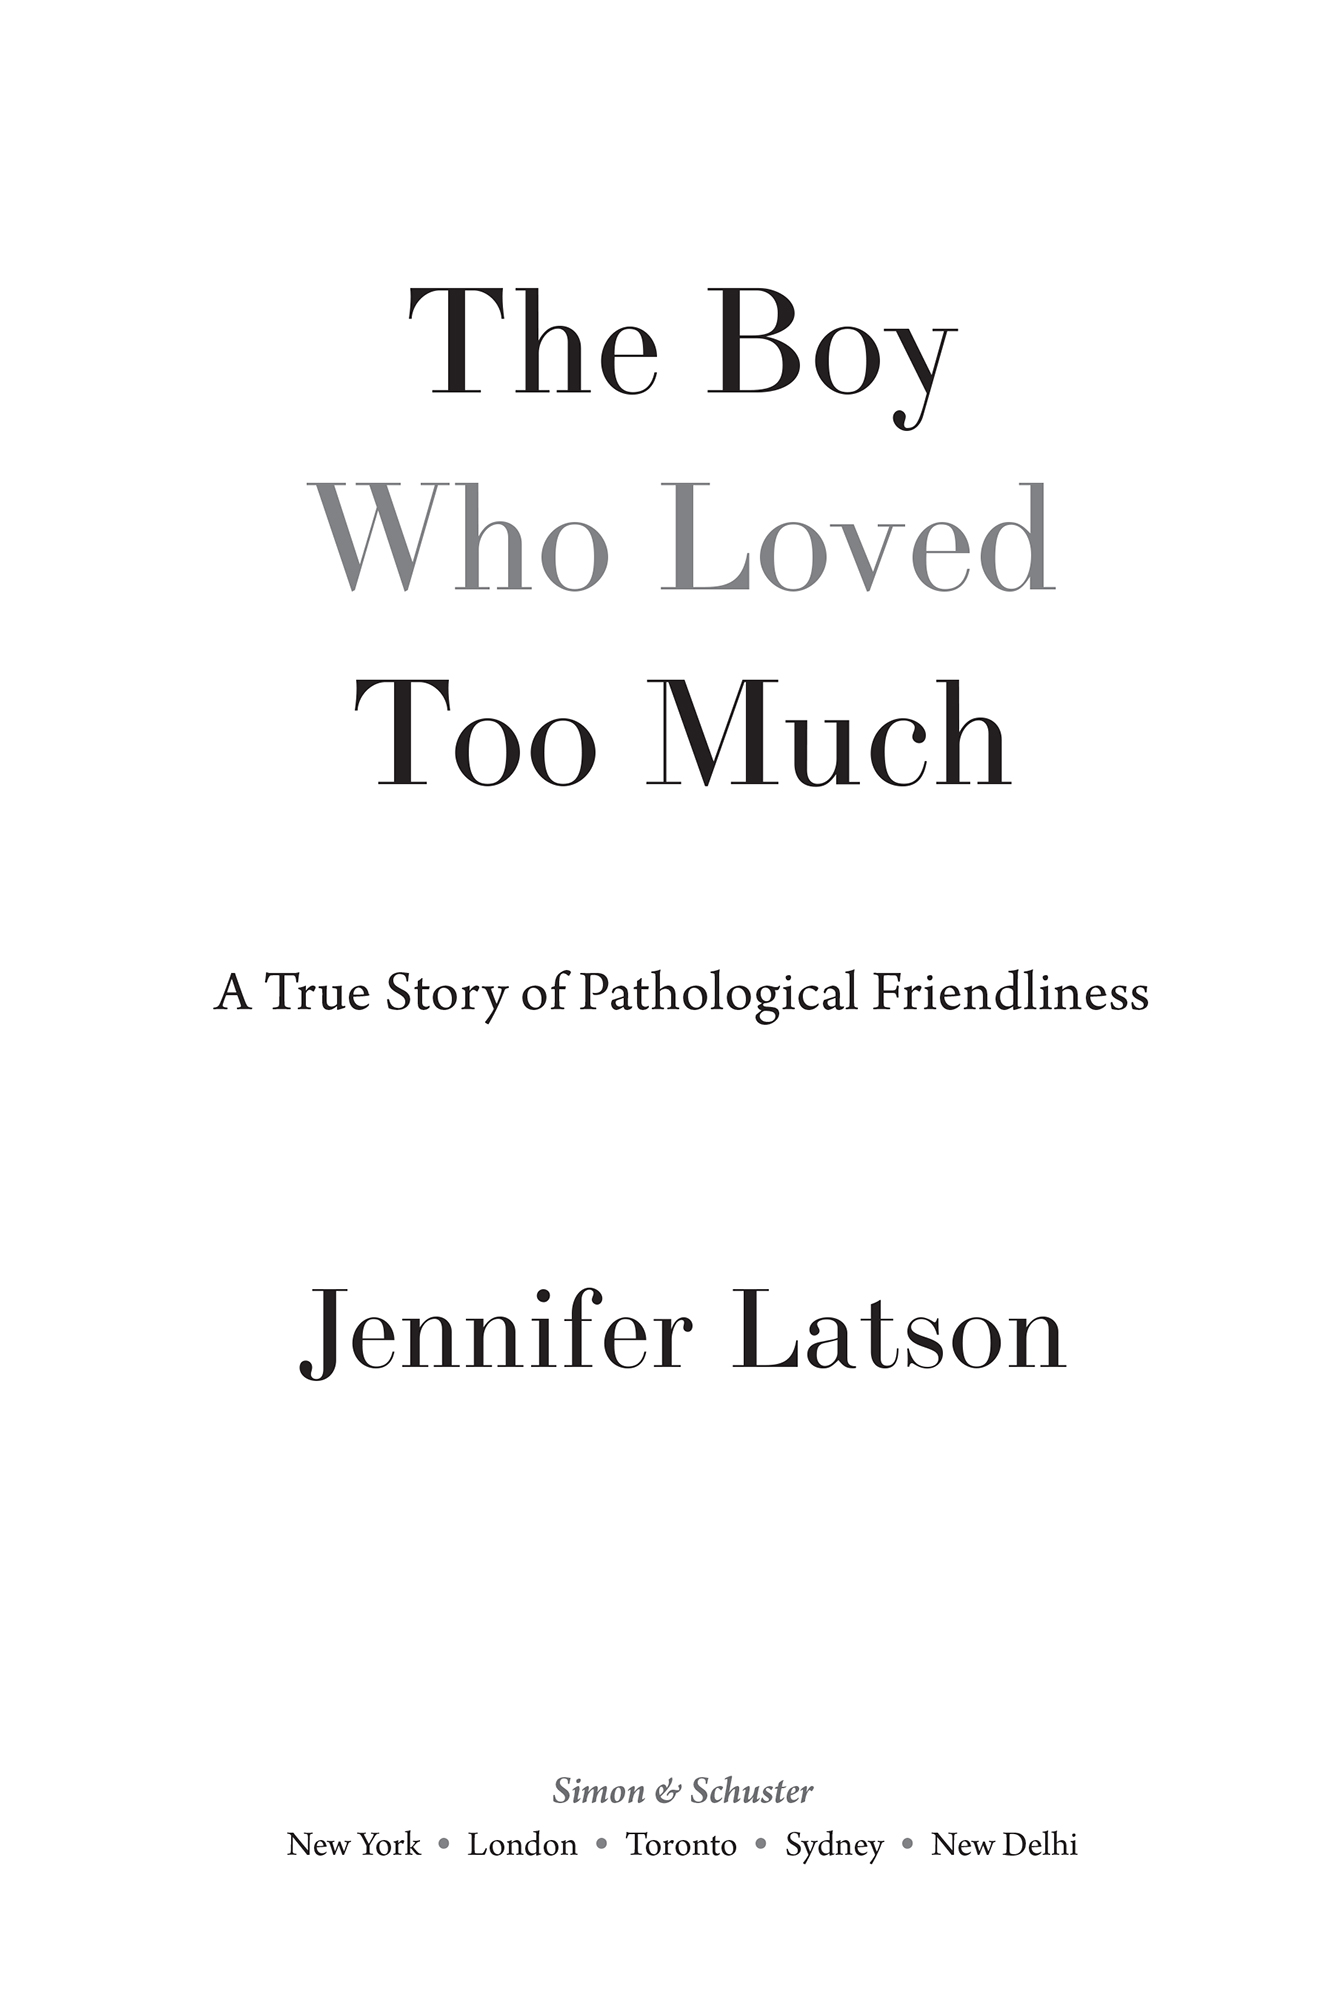 The boy who loved too much a true story of pathological friendliness - image 1